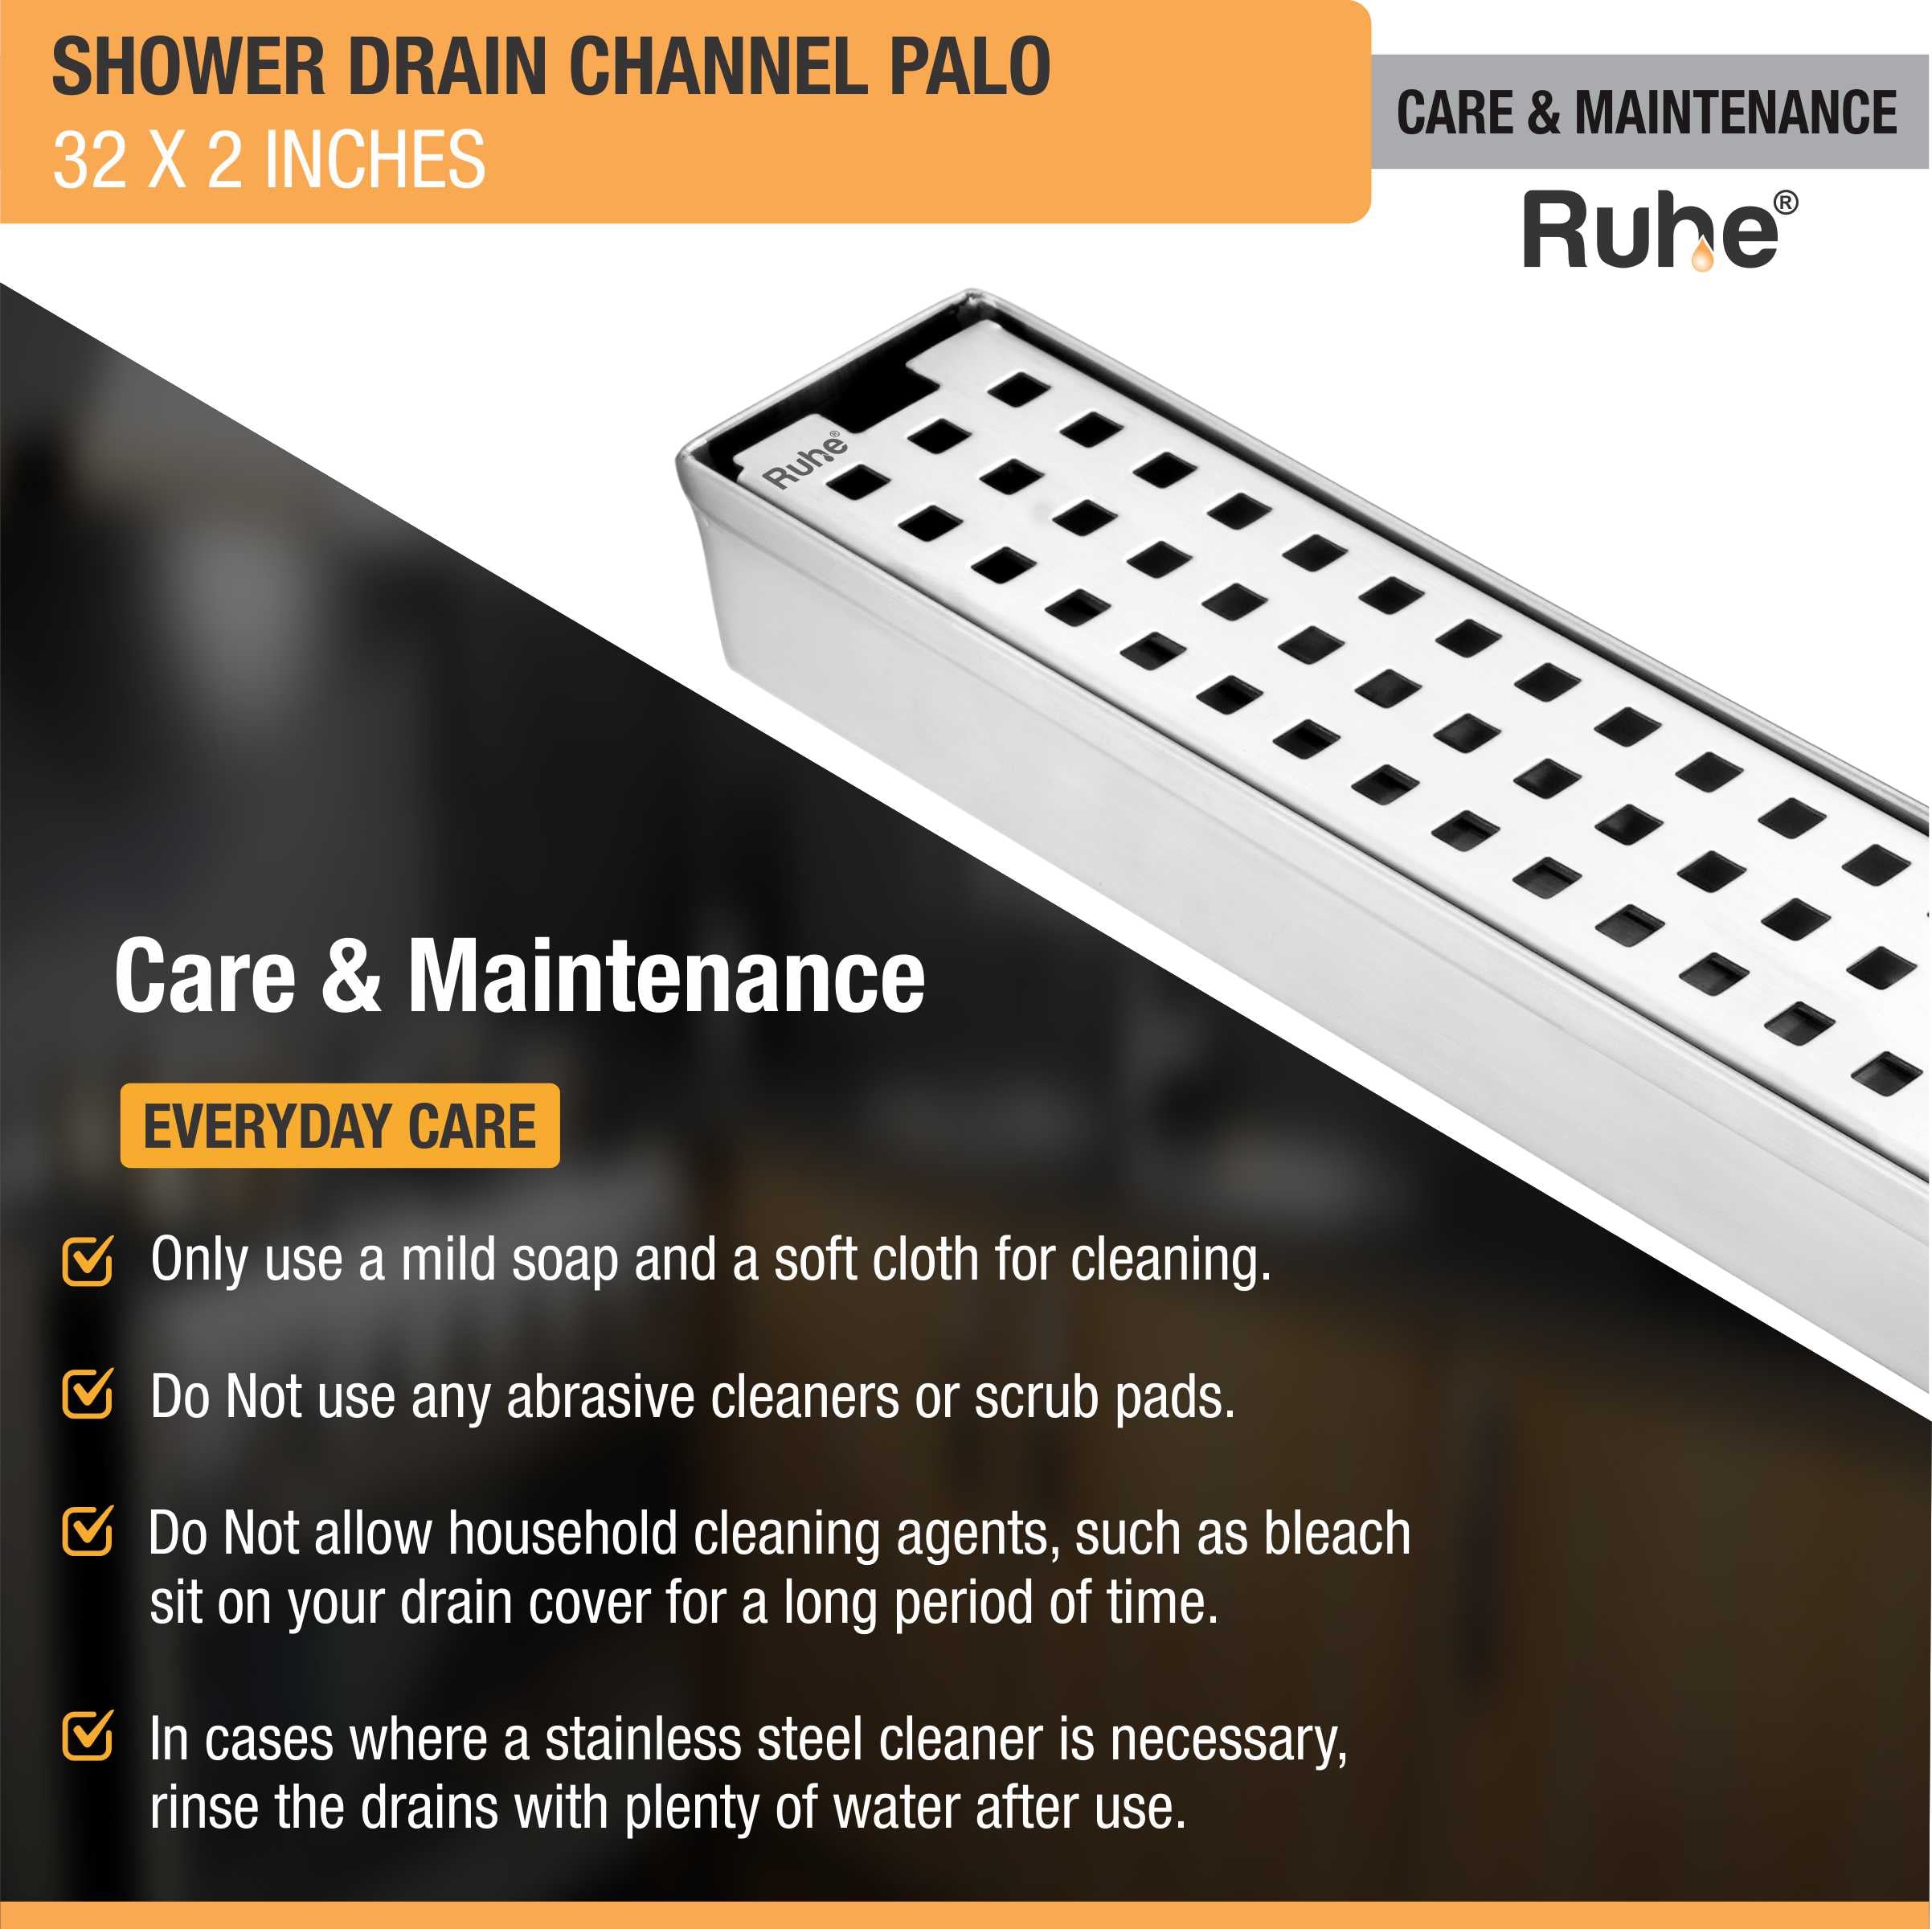 Palo Shower Drain Channel (32 X 2 Inches) (304 Grade) care and maintenance